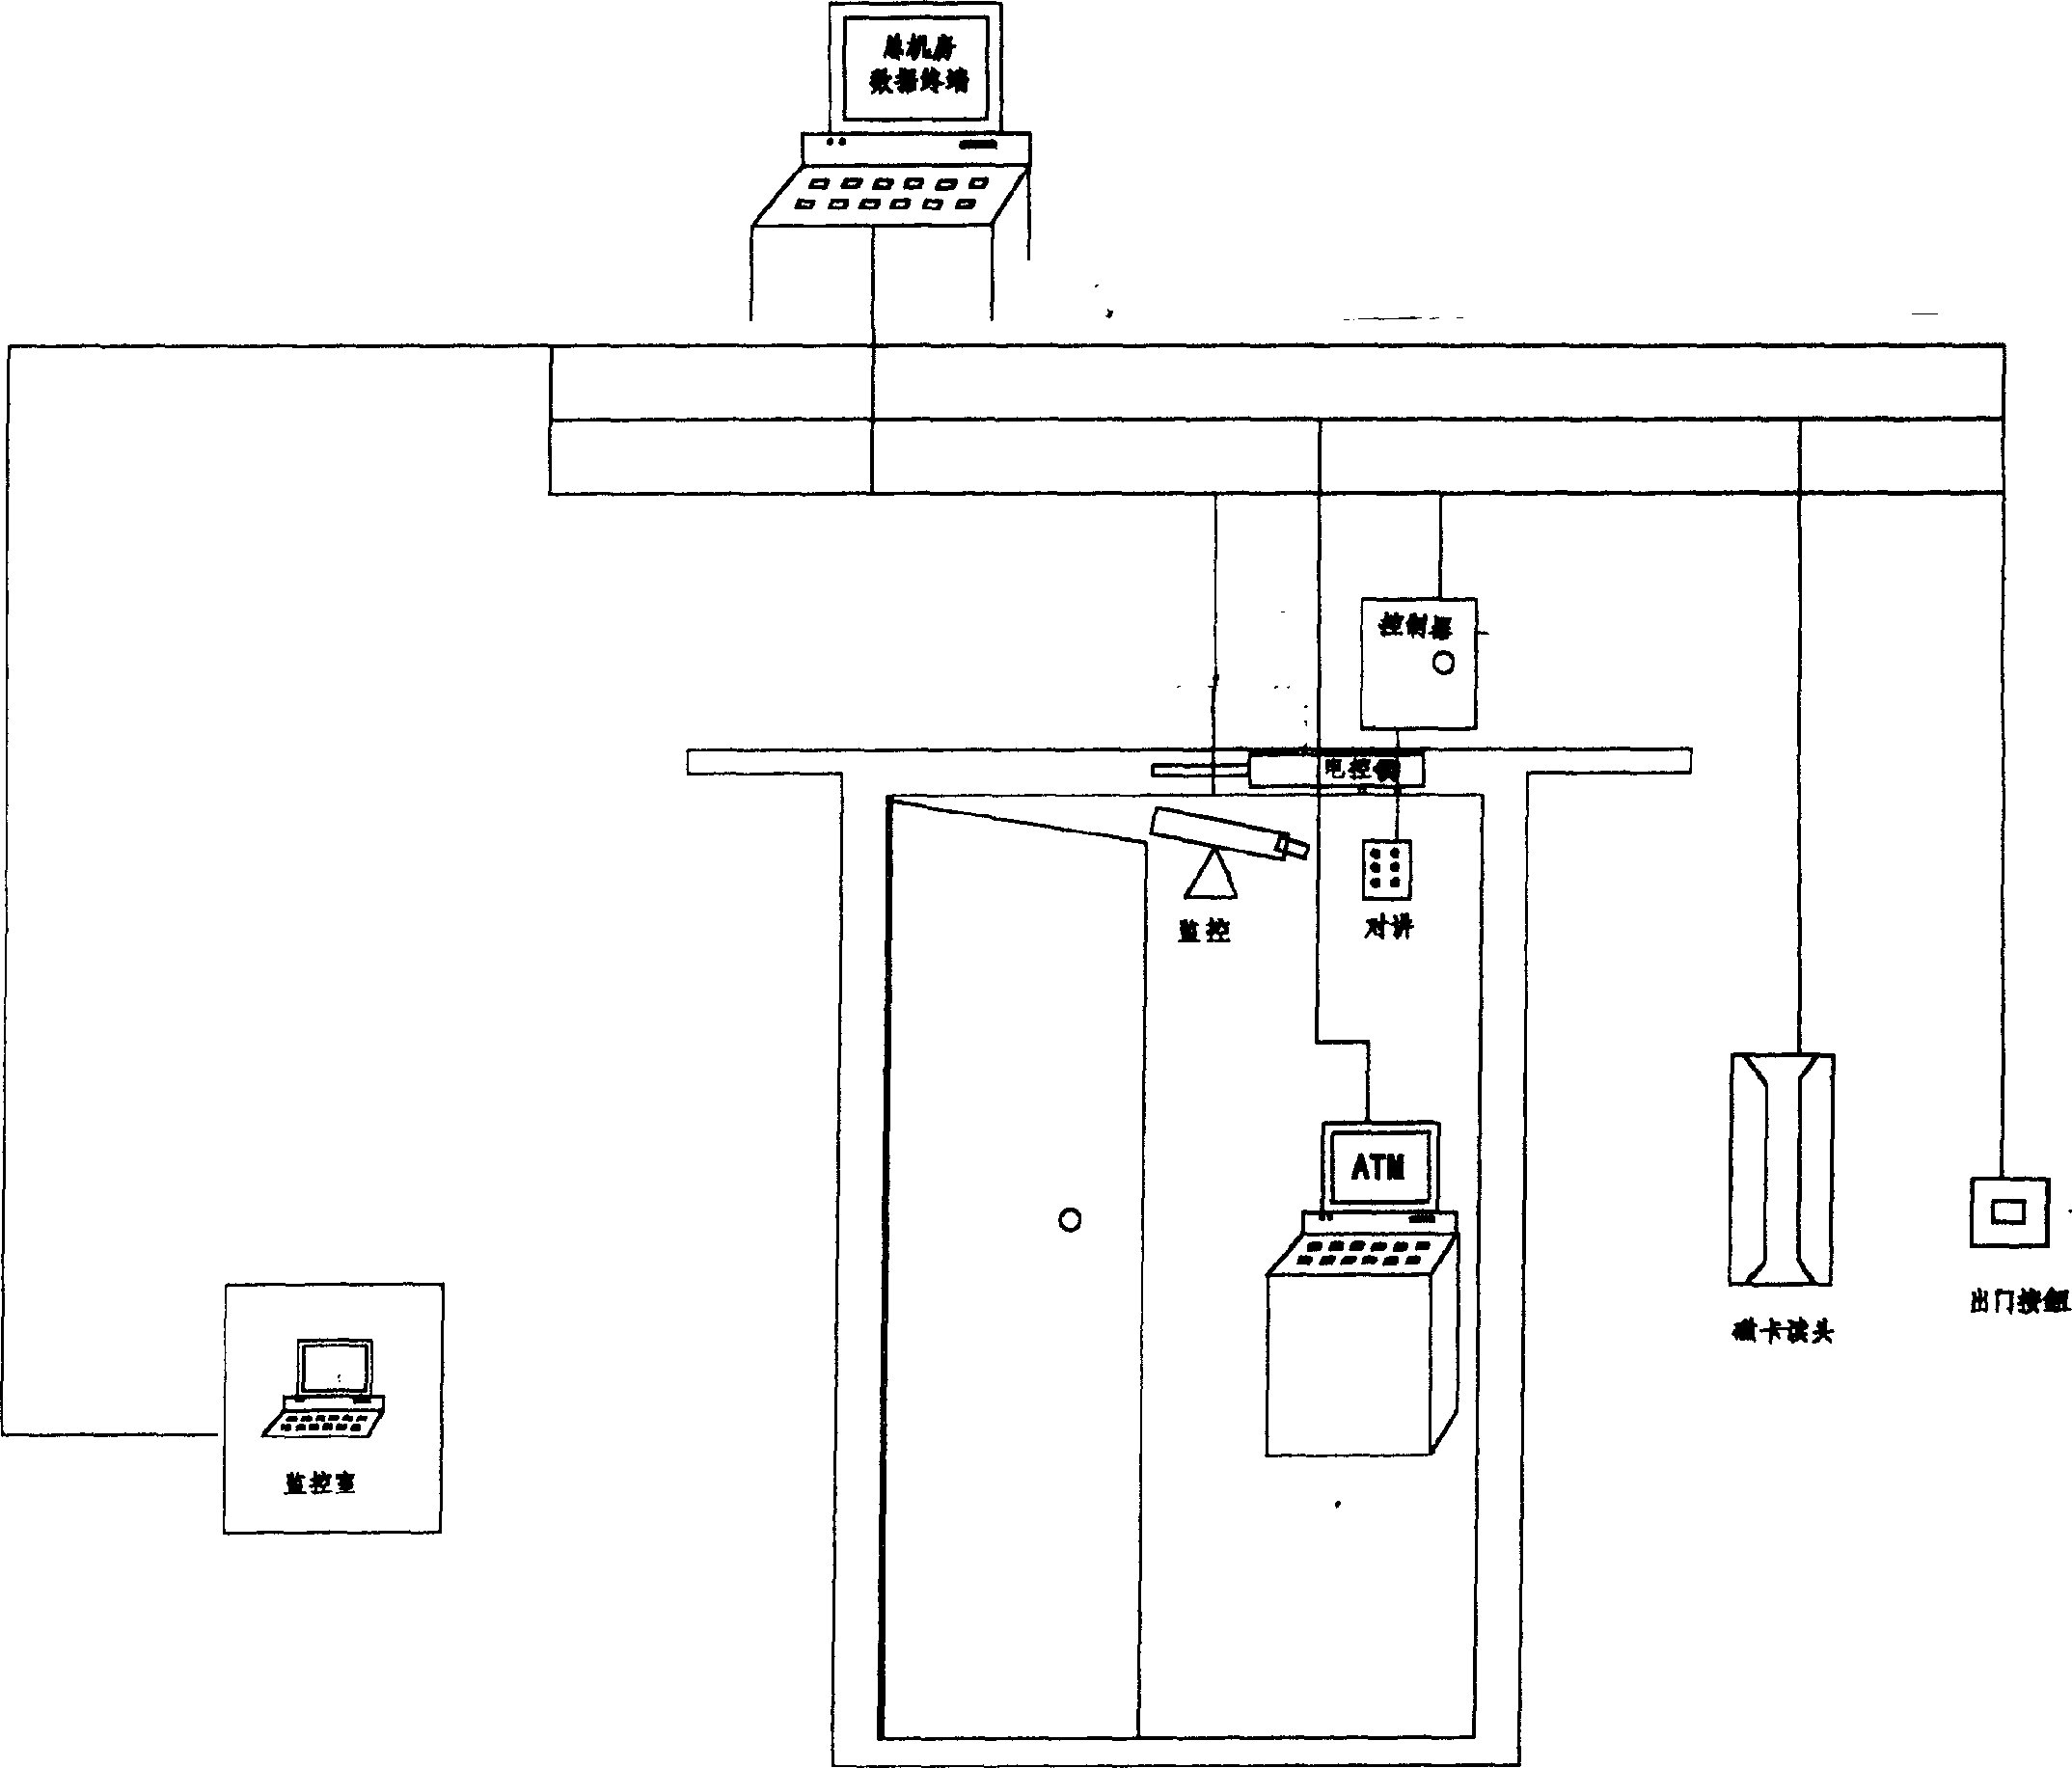 Control system for recognizing robbery information by antomatic teller machine and its method